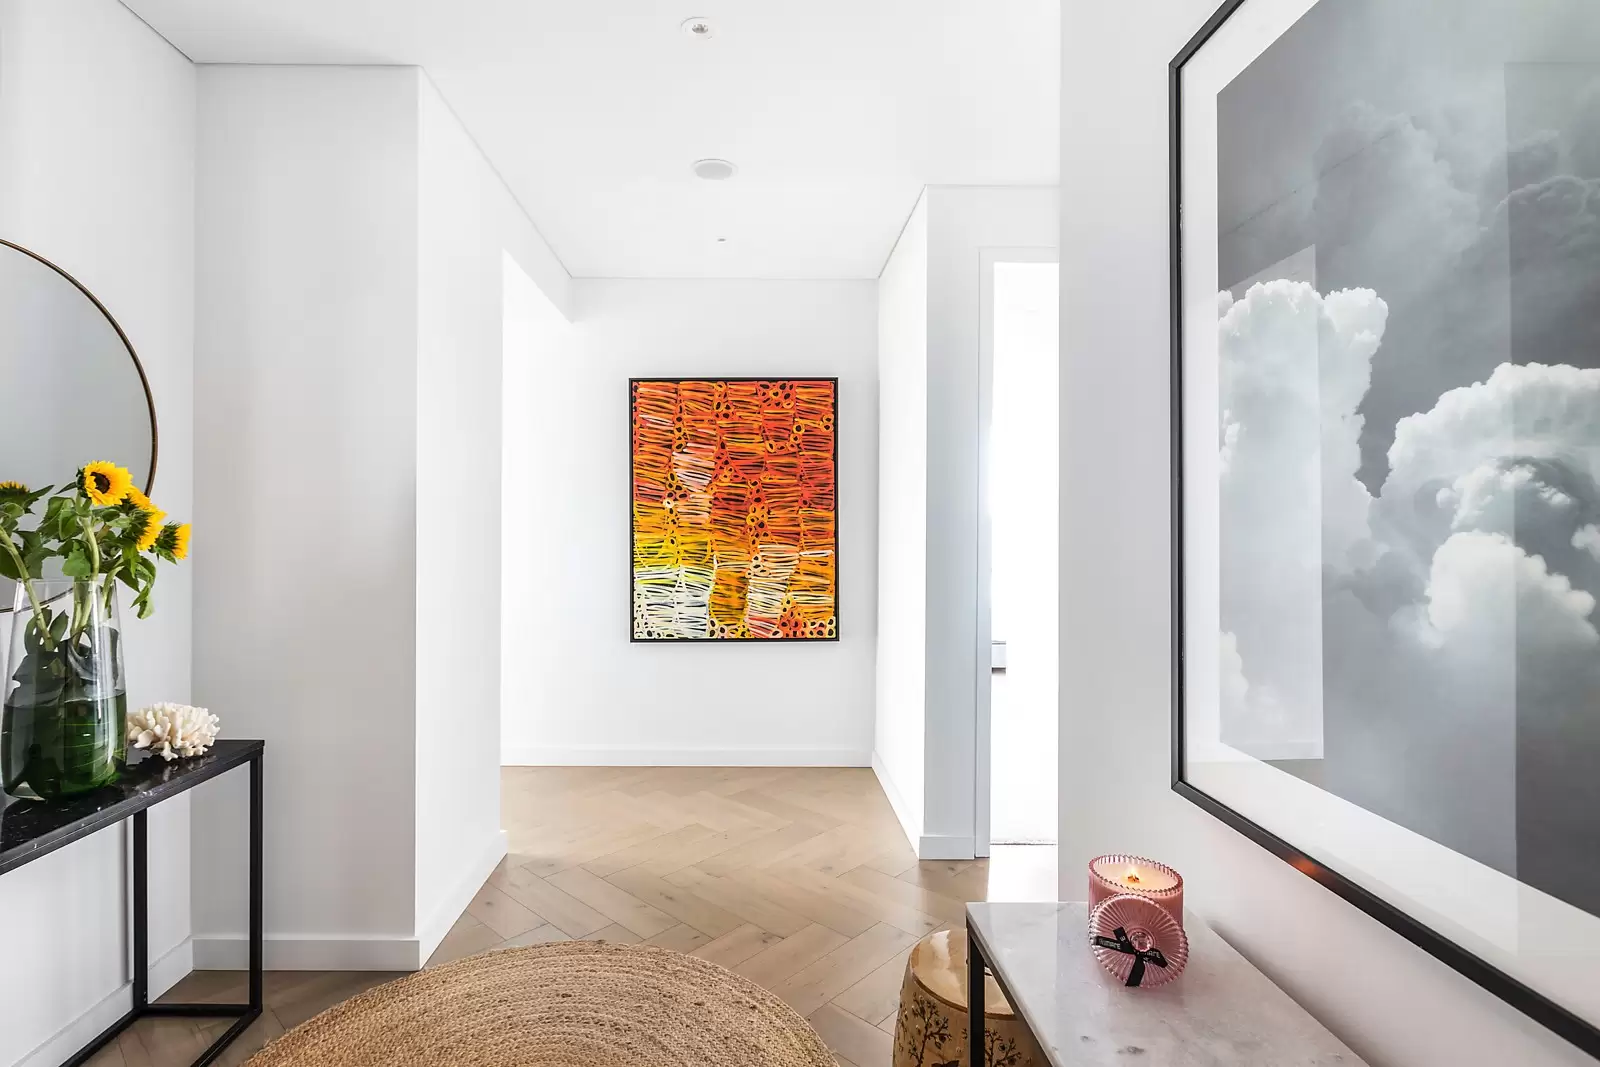 Photo #11: 702/37 Bayswater Road, Potts Point - Sold by Sydney Sotheby's International Realty